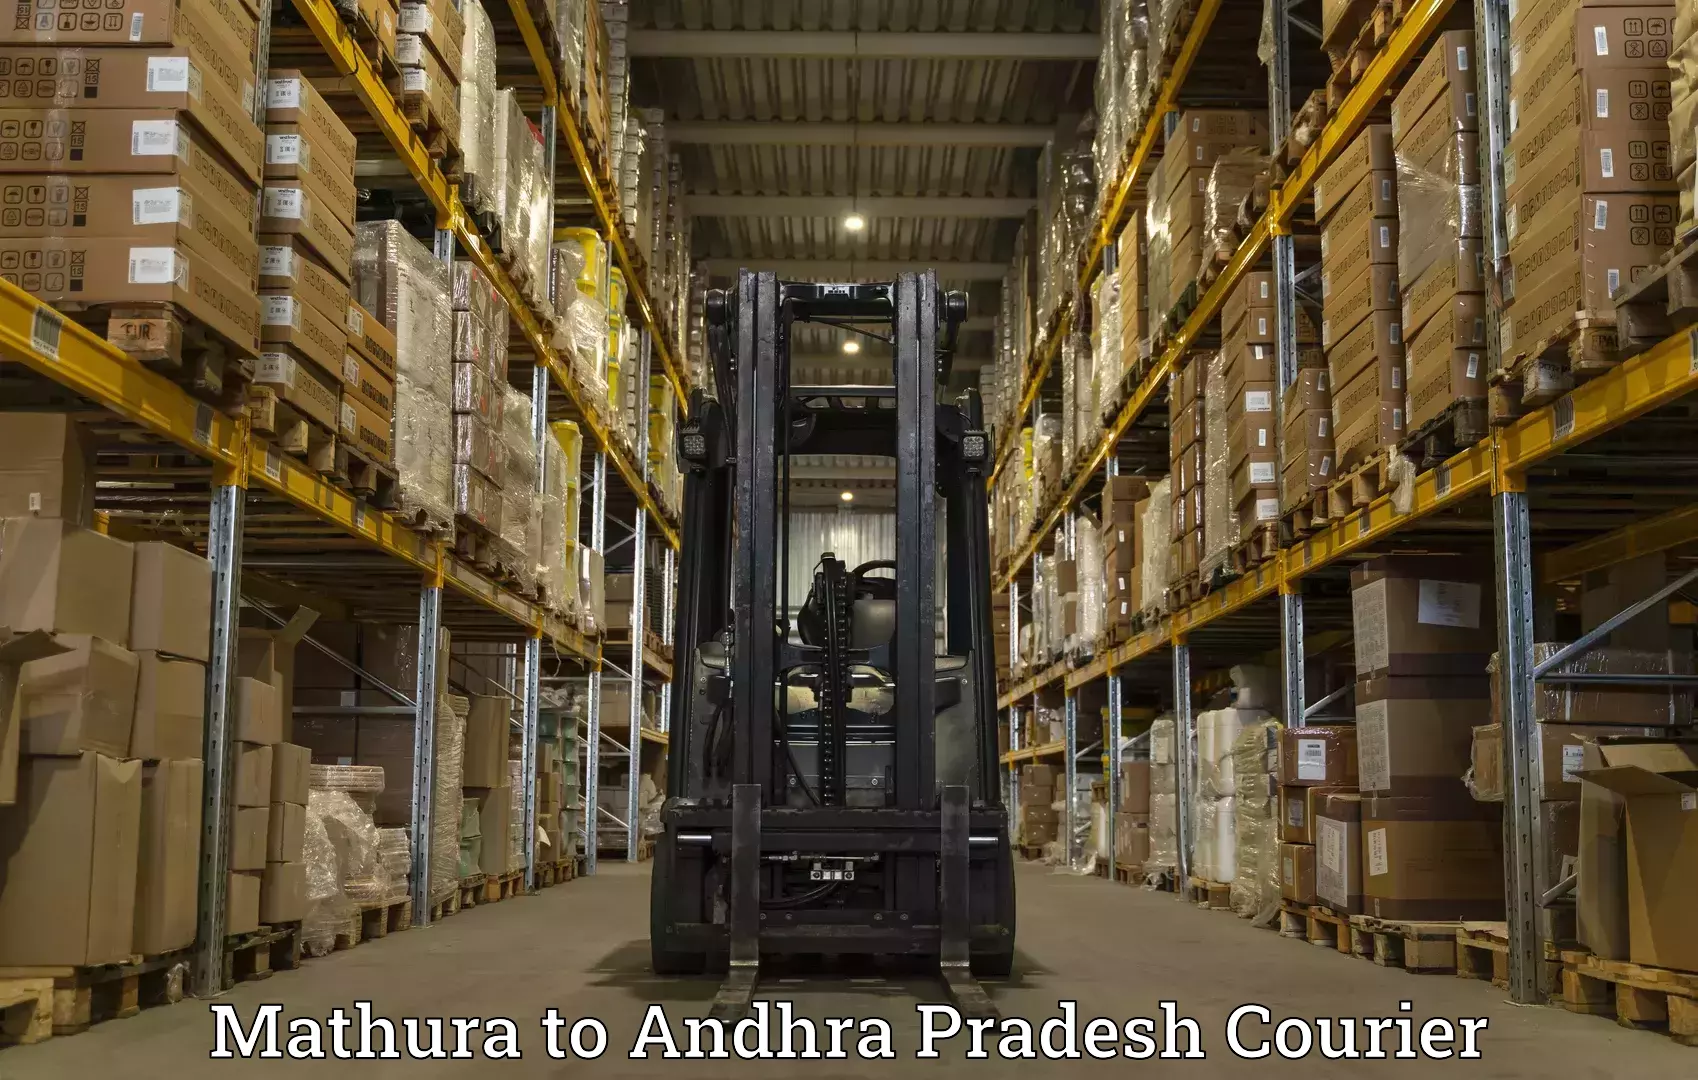 Courier service innovation in Mathura to Visakhapatnam Port